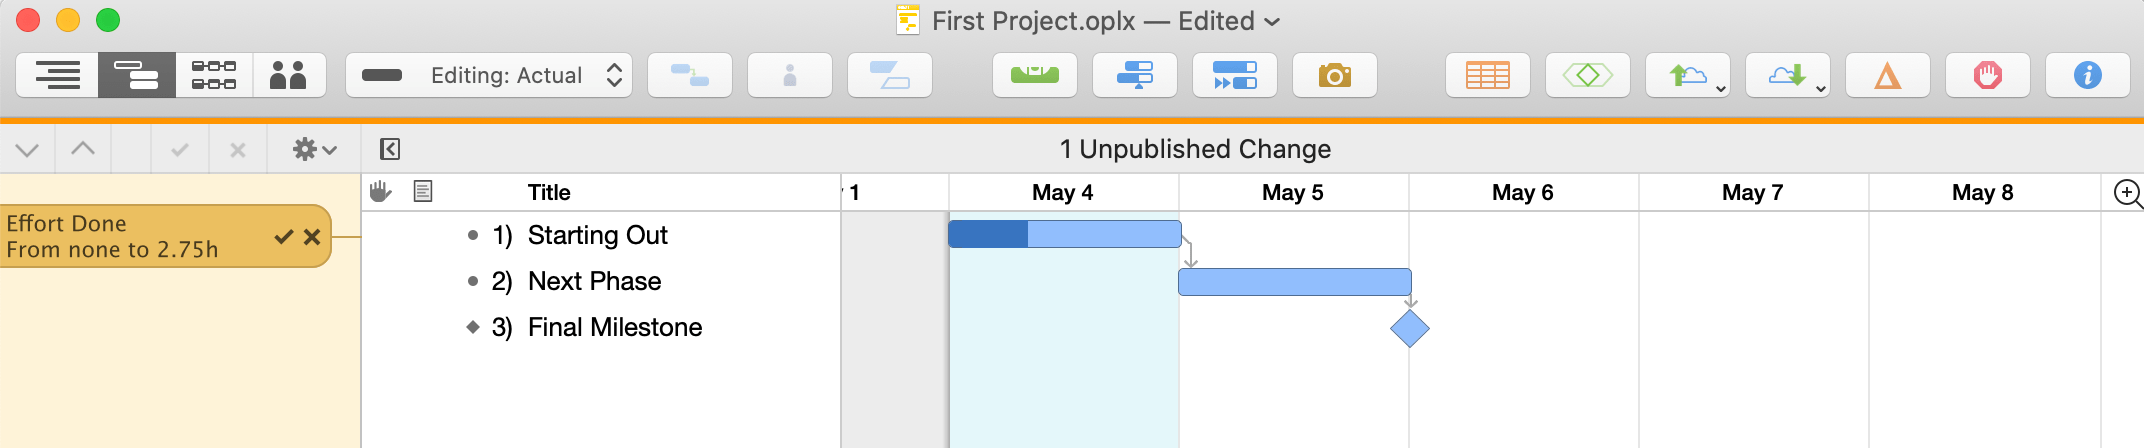 Setting up sharing options for a project in OmniPlan for Mac, Step 5.